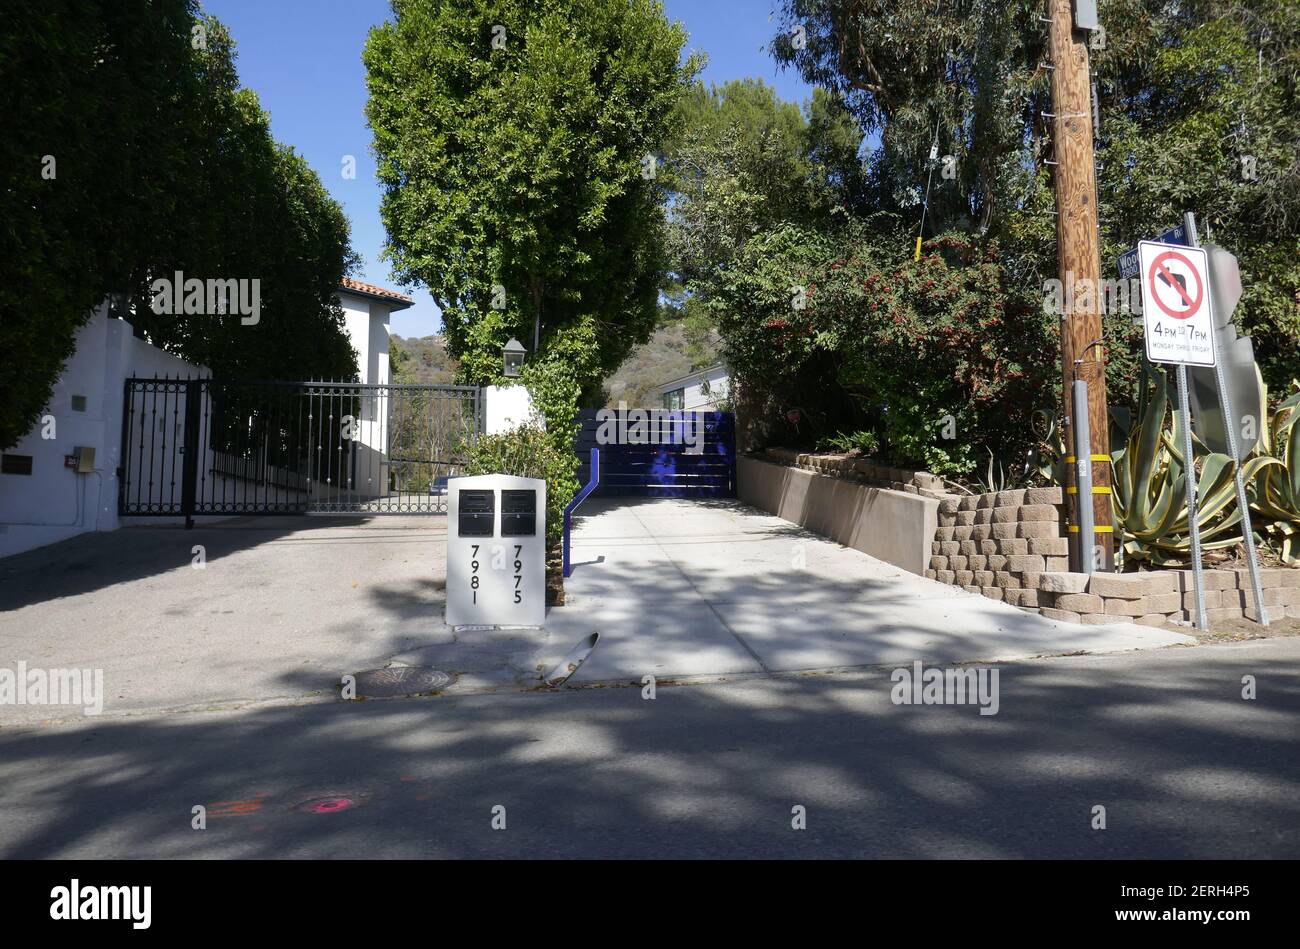 Los Angeles, California, USA 28th February 2021 A general view of atmosphere of actress Rita Hayworth and actor/director Orson Welles former home/house on February 28, 2021 in Los Angeles, California, USA. Photo by Barry King/Alamy Stock Photo Stock Photo